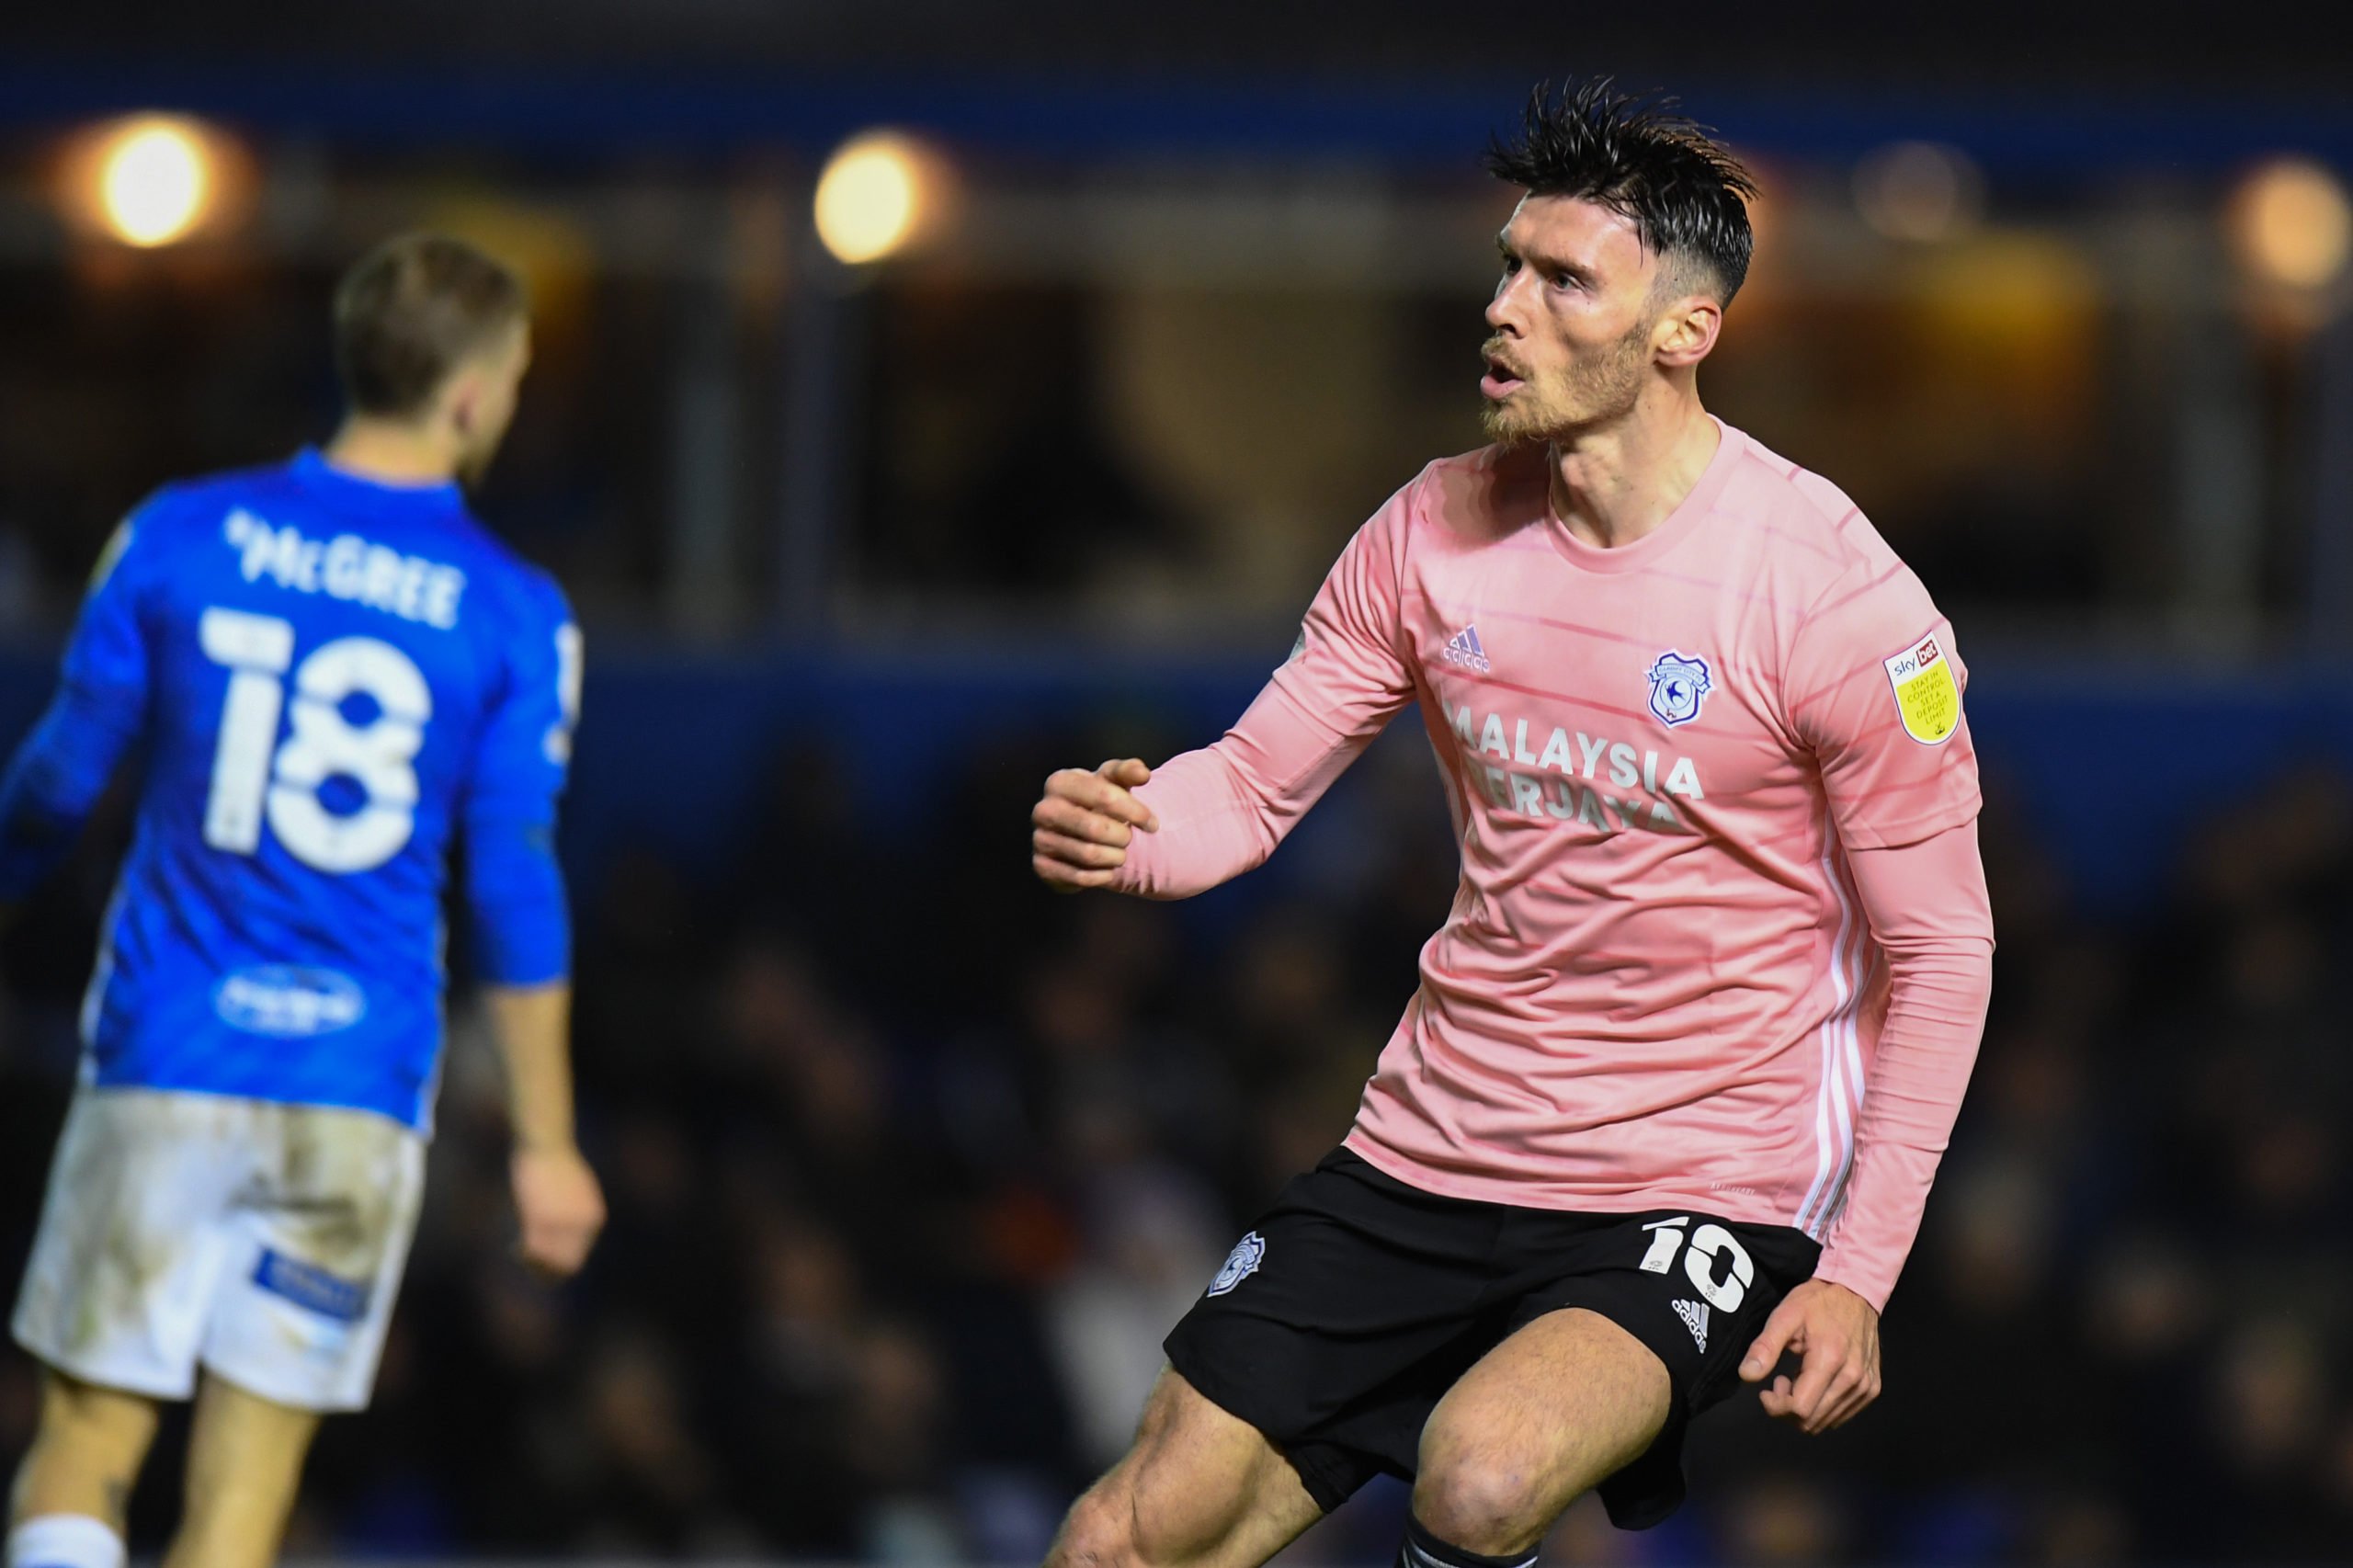 West Ham could make a move to sign Cardiff City striker Kieffer Moore in January